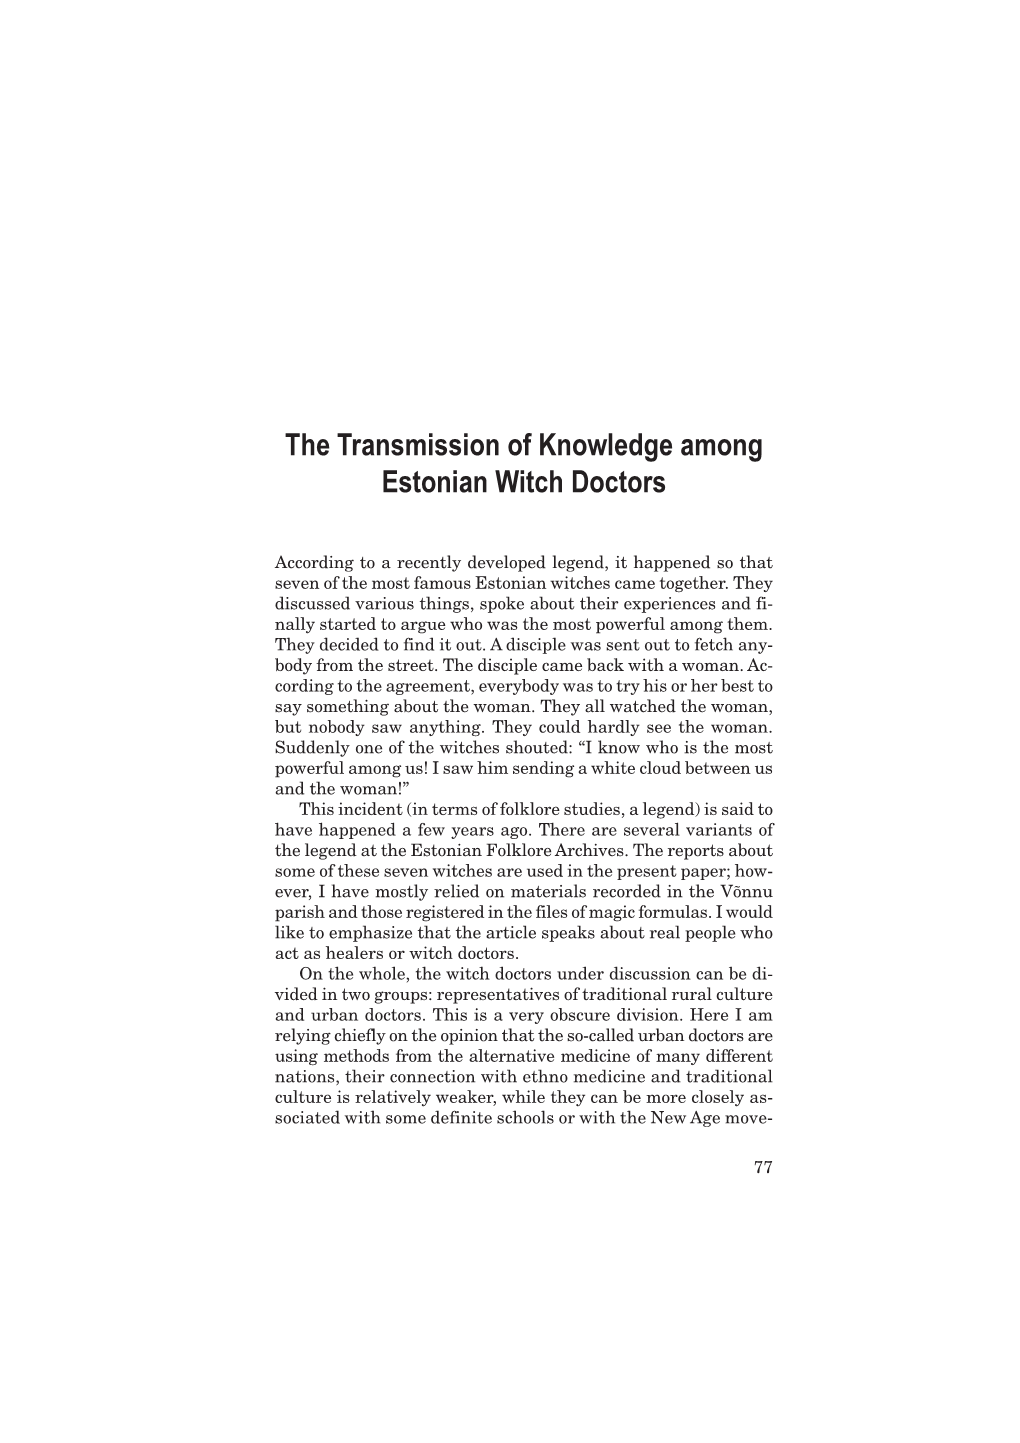 The Transmission of Knowledge Among Estonian Witch Doctors